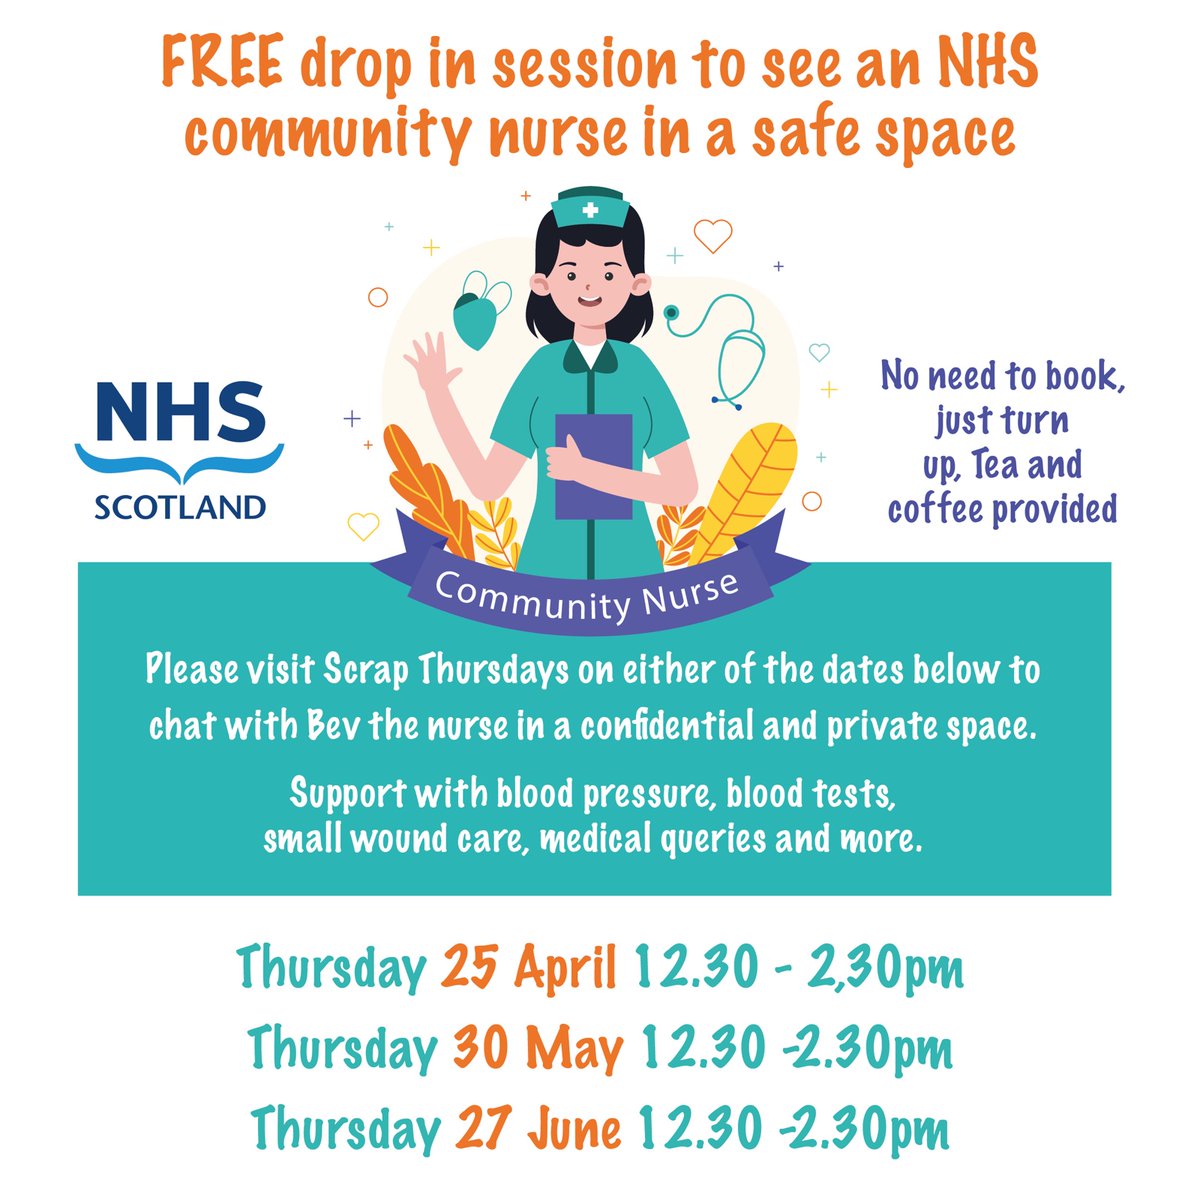 We will be having a Community Nurse Bev in our community wellgate space. Thurs 25th of April Thurs 30th of May Thurs 27th of June 12.30pm - 2.30pm ScrapAntics Community space Level 2 at the bottom of the Wellgate library stairs Free with refreshments provided.